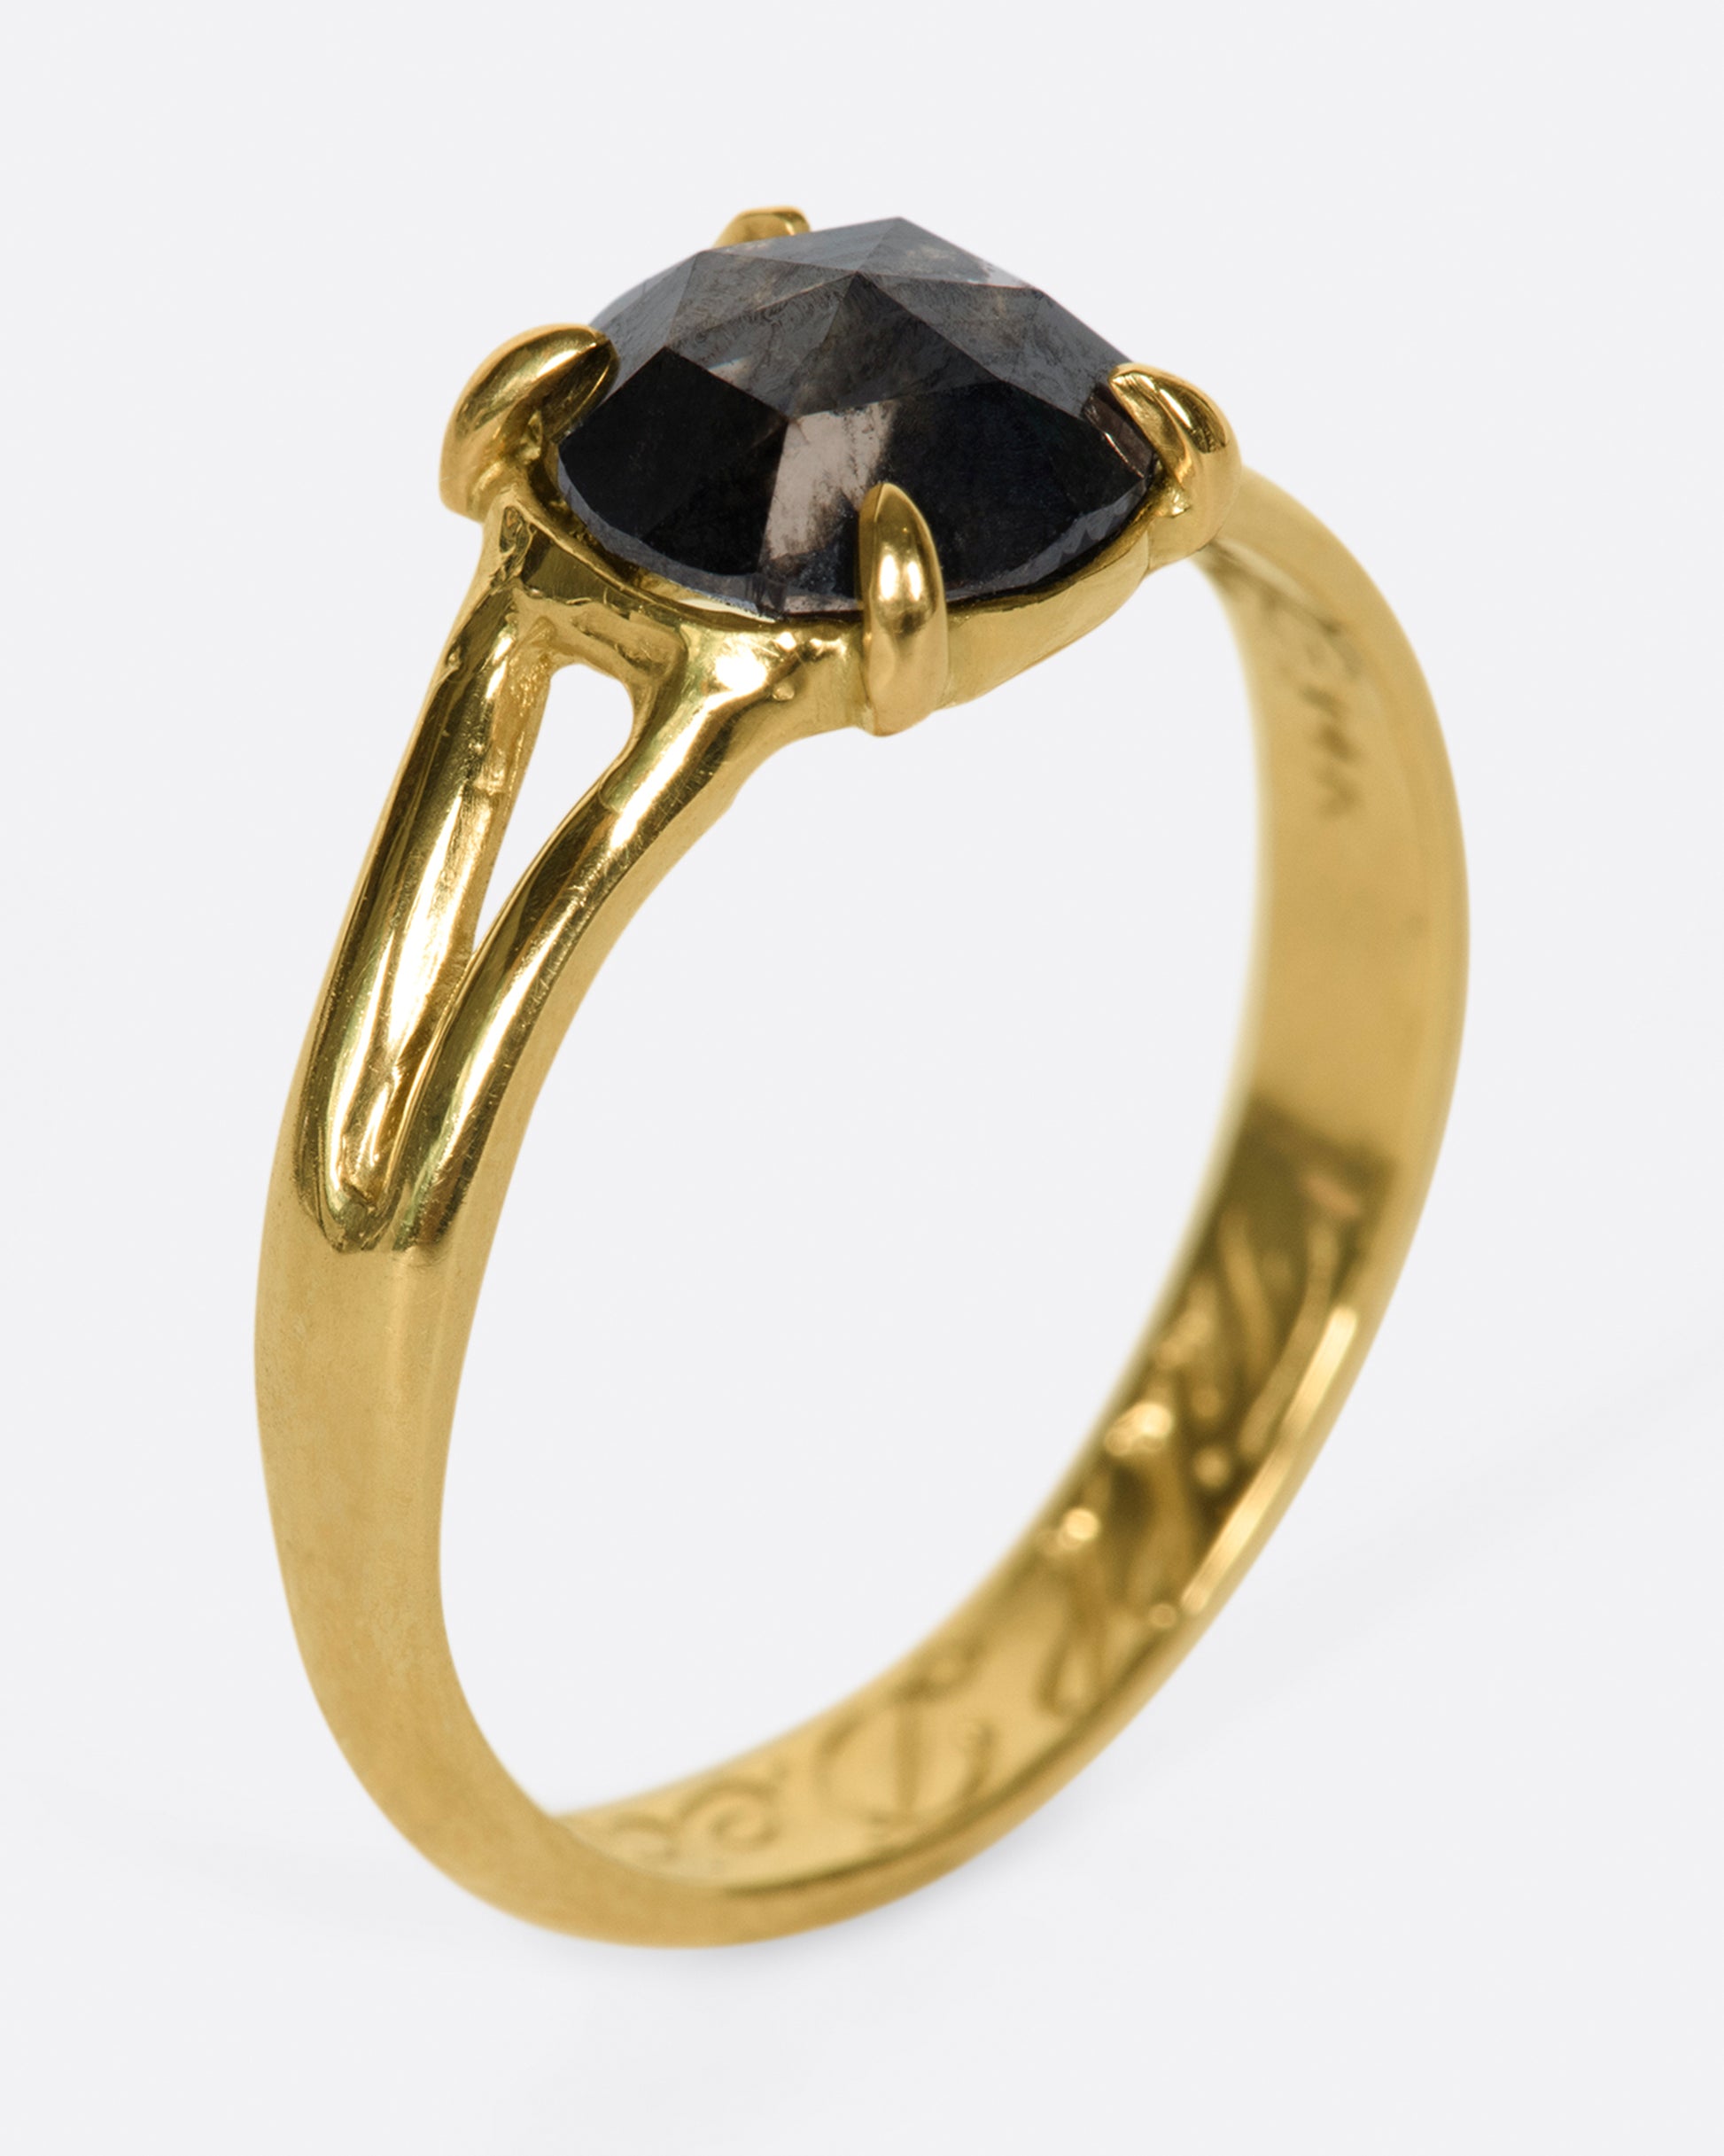 A split-shank gold ring with a prong set, rose cut, rustic diamond and "'till death" engraved on the inside.